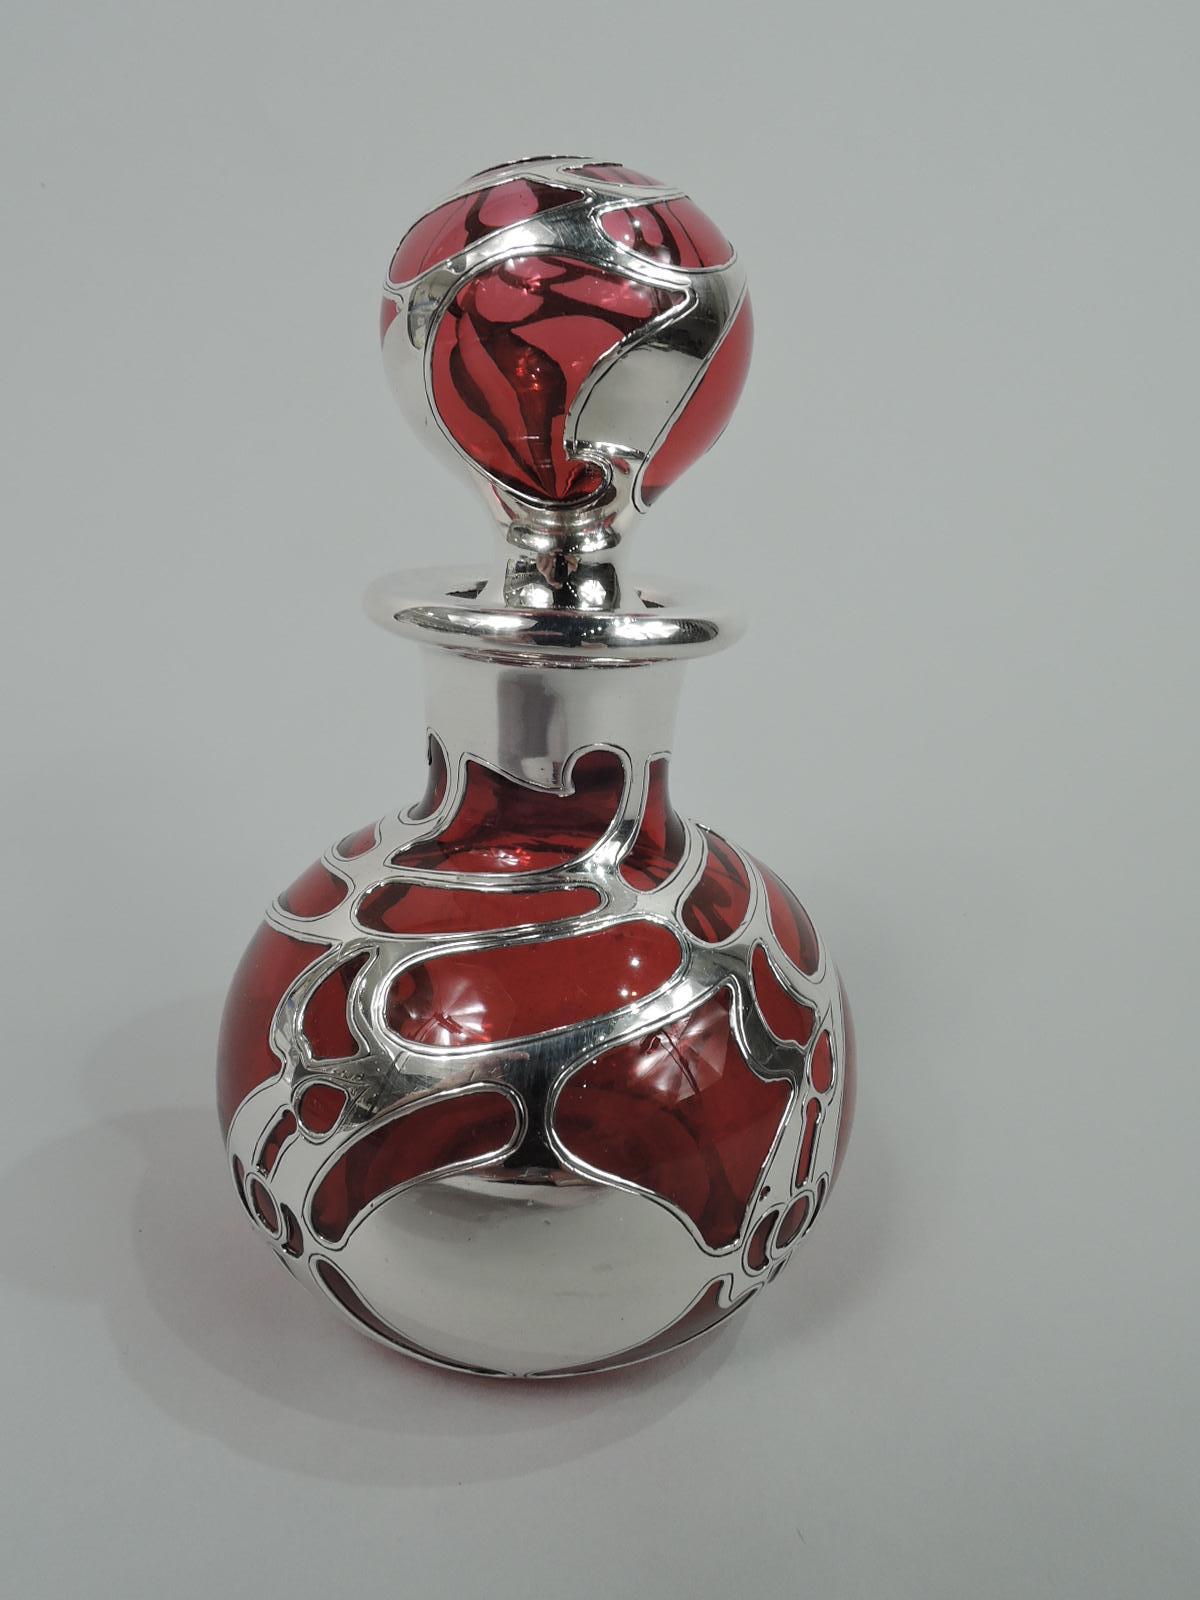 Turn-of-the-century Art Nouveau glass perfume with engraved silver overlay. Made by Gorham in Providence. Globular with short neck and everted rim in silver collar. Ball stopper. Open and whiplash overlay with linear borders, and round cartouche